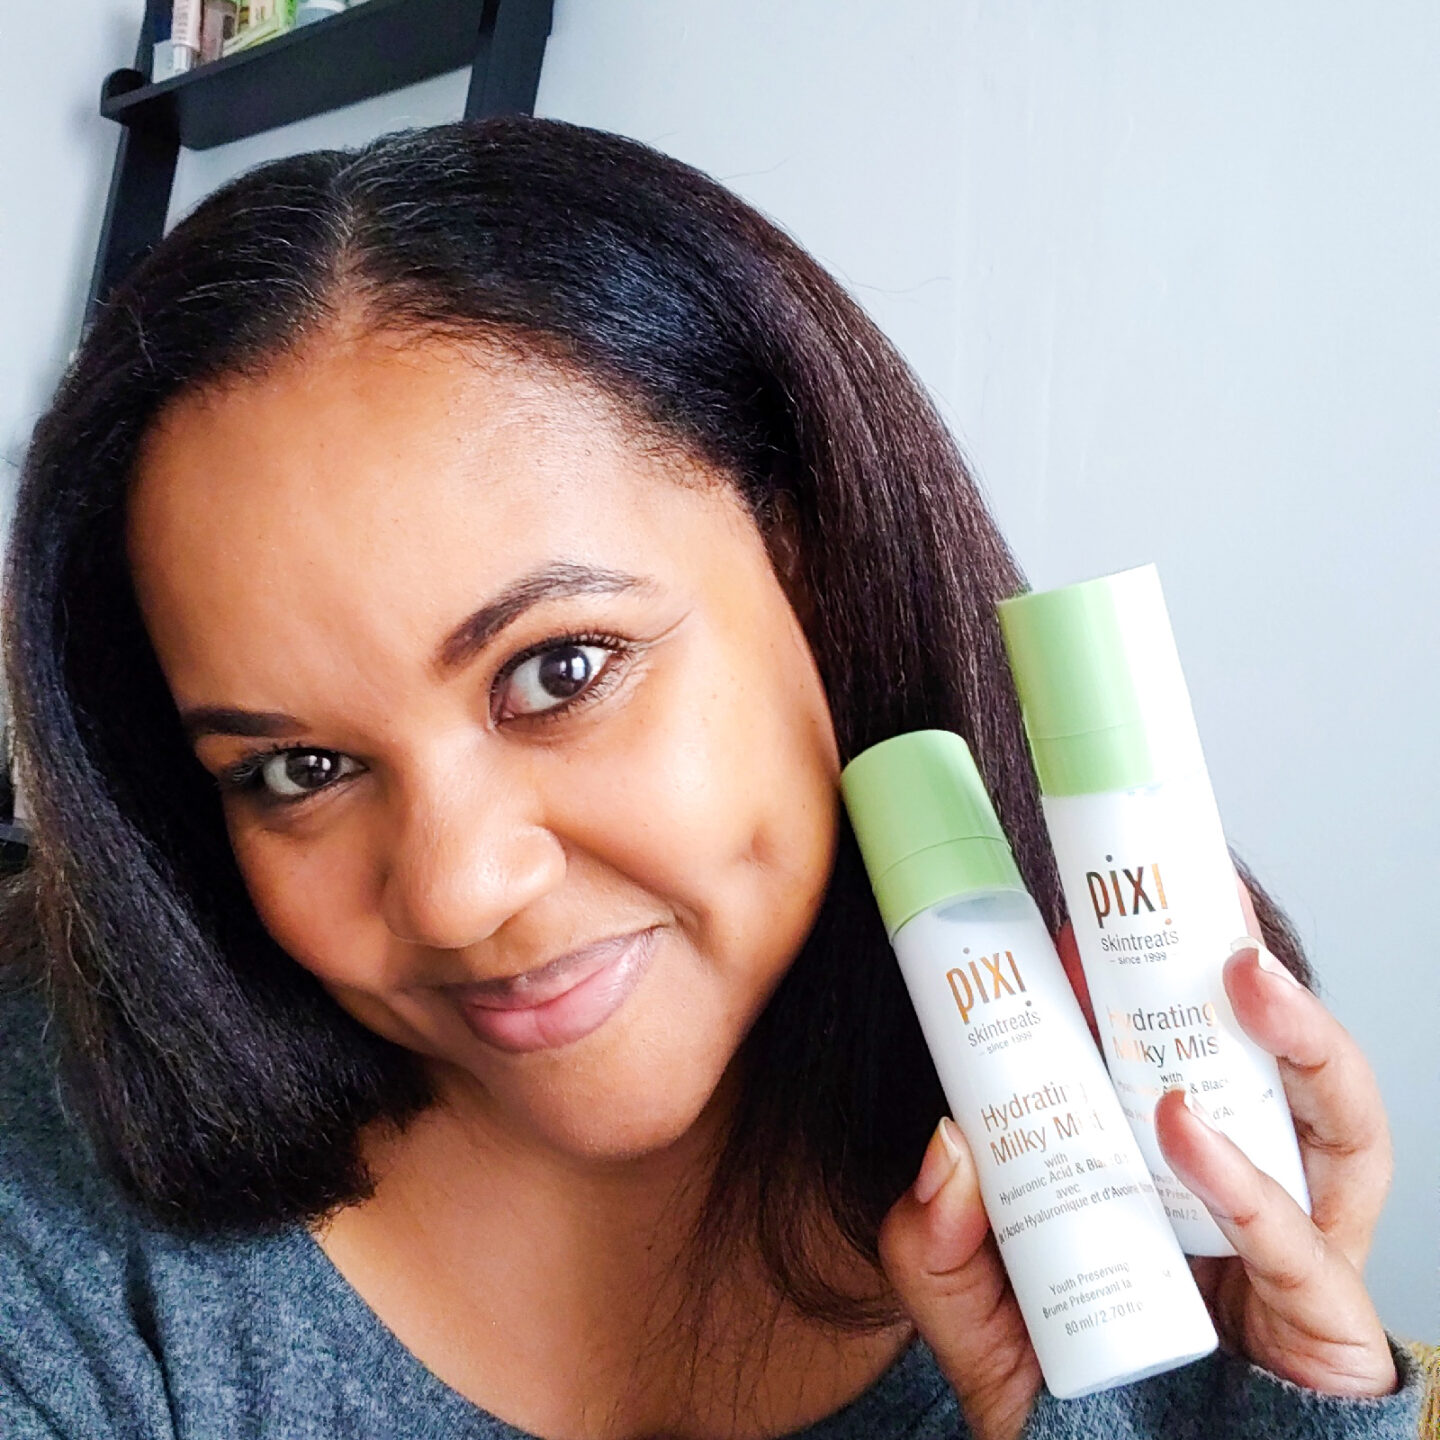 Patranila holds two bottles of Pixi Beauty Hydrating Milky Mist for extra dry skin in winter.